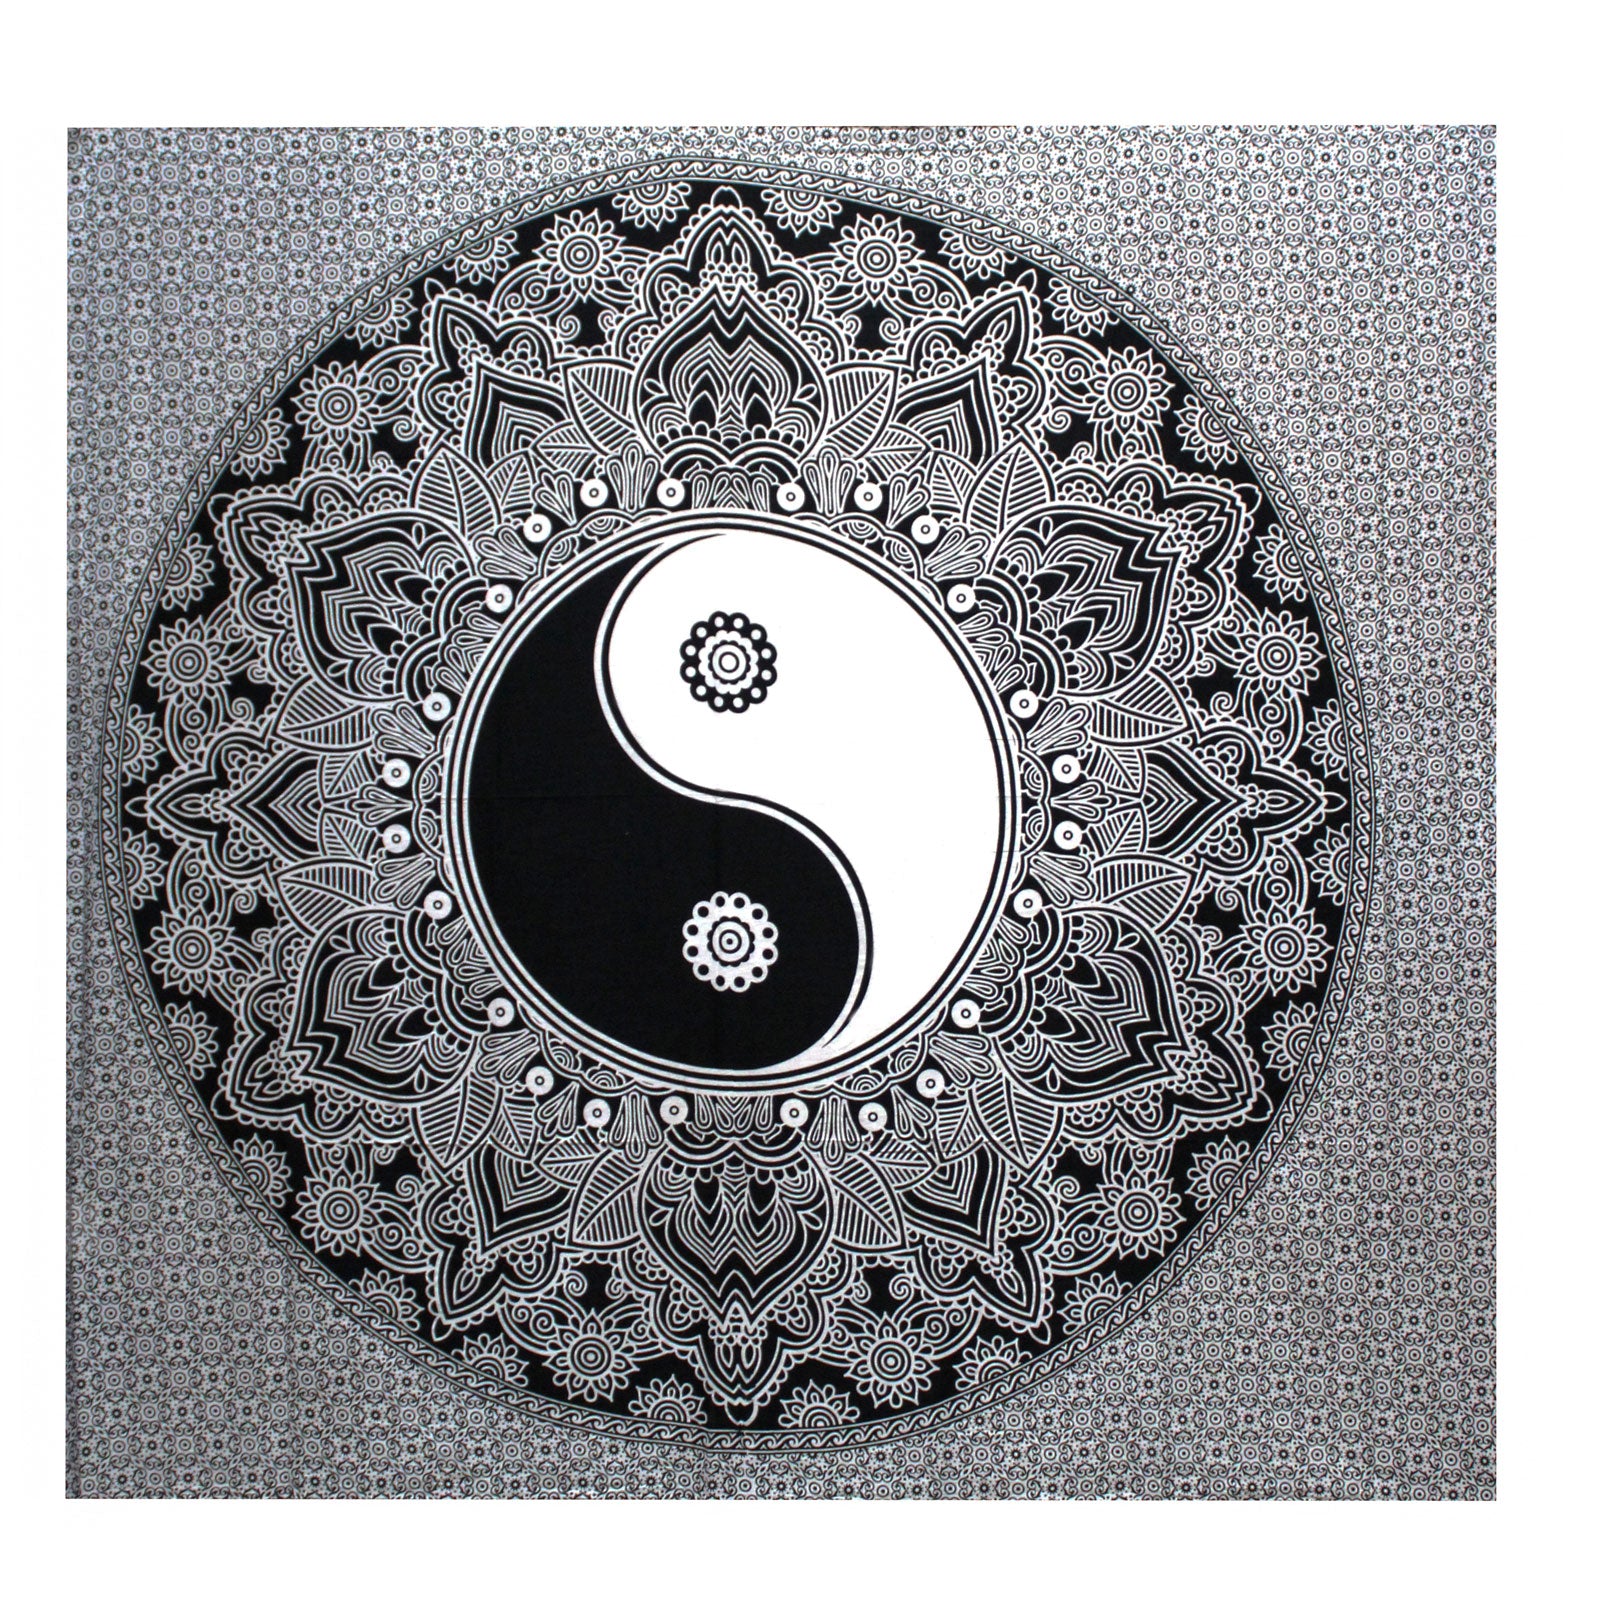 View BW Double Cotton Bedspread Wall Hanging Ying yang information